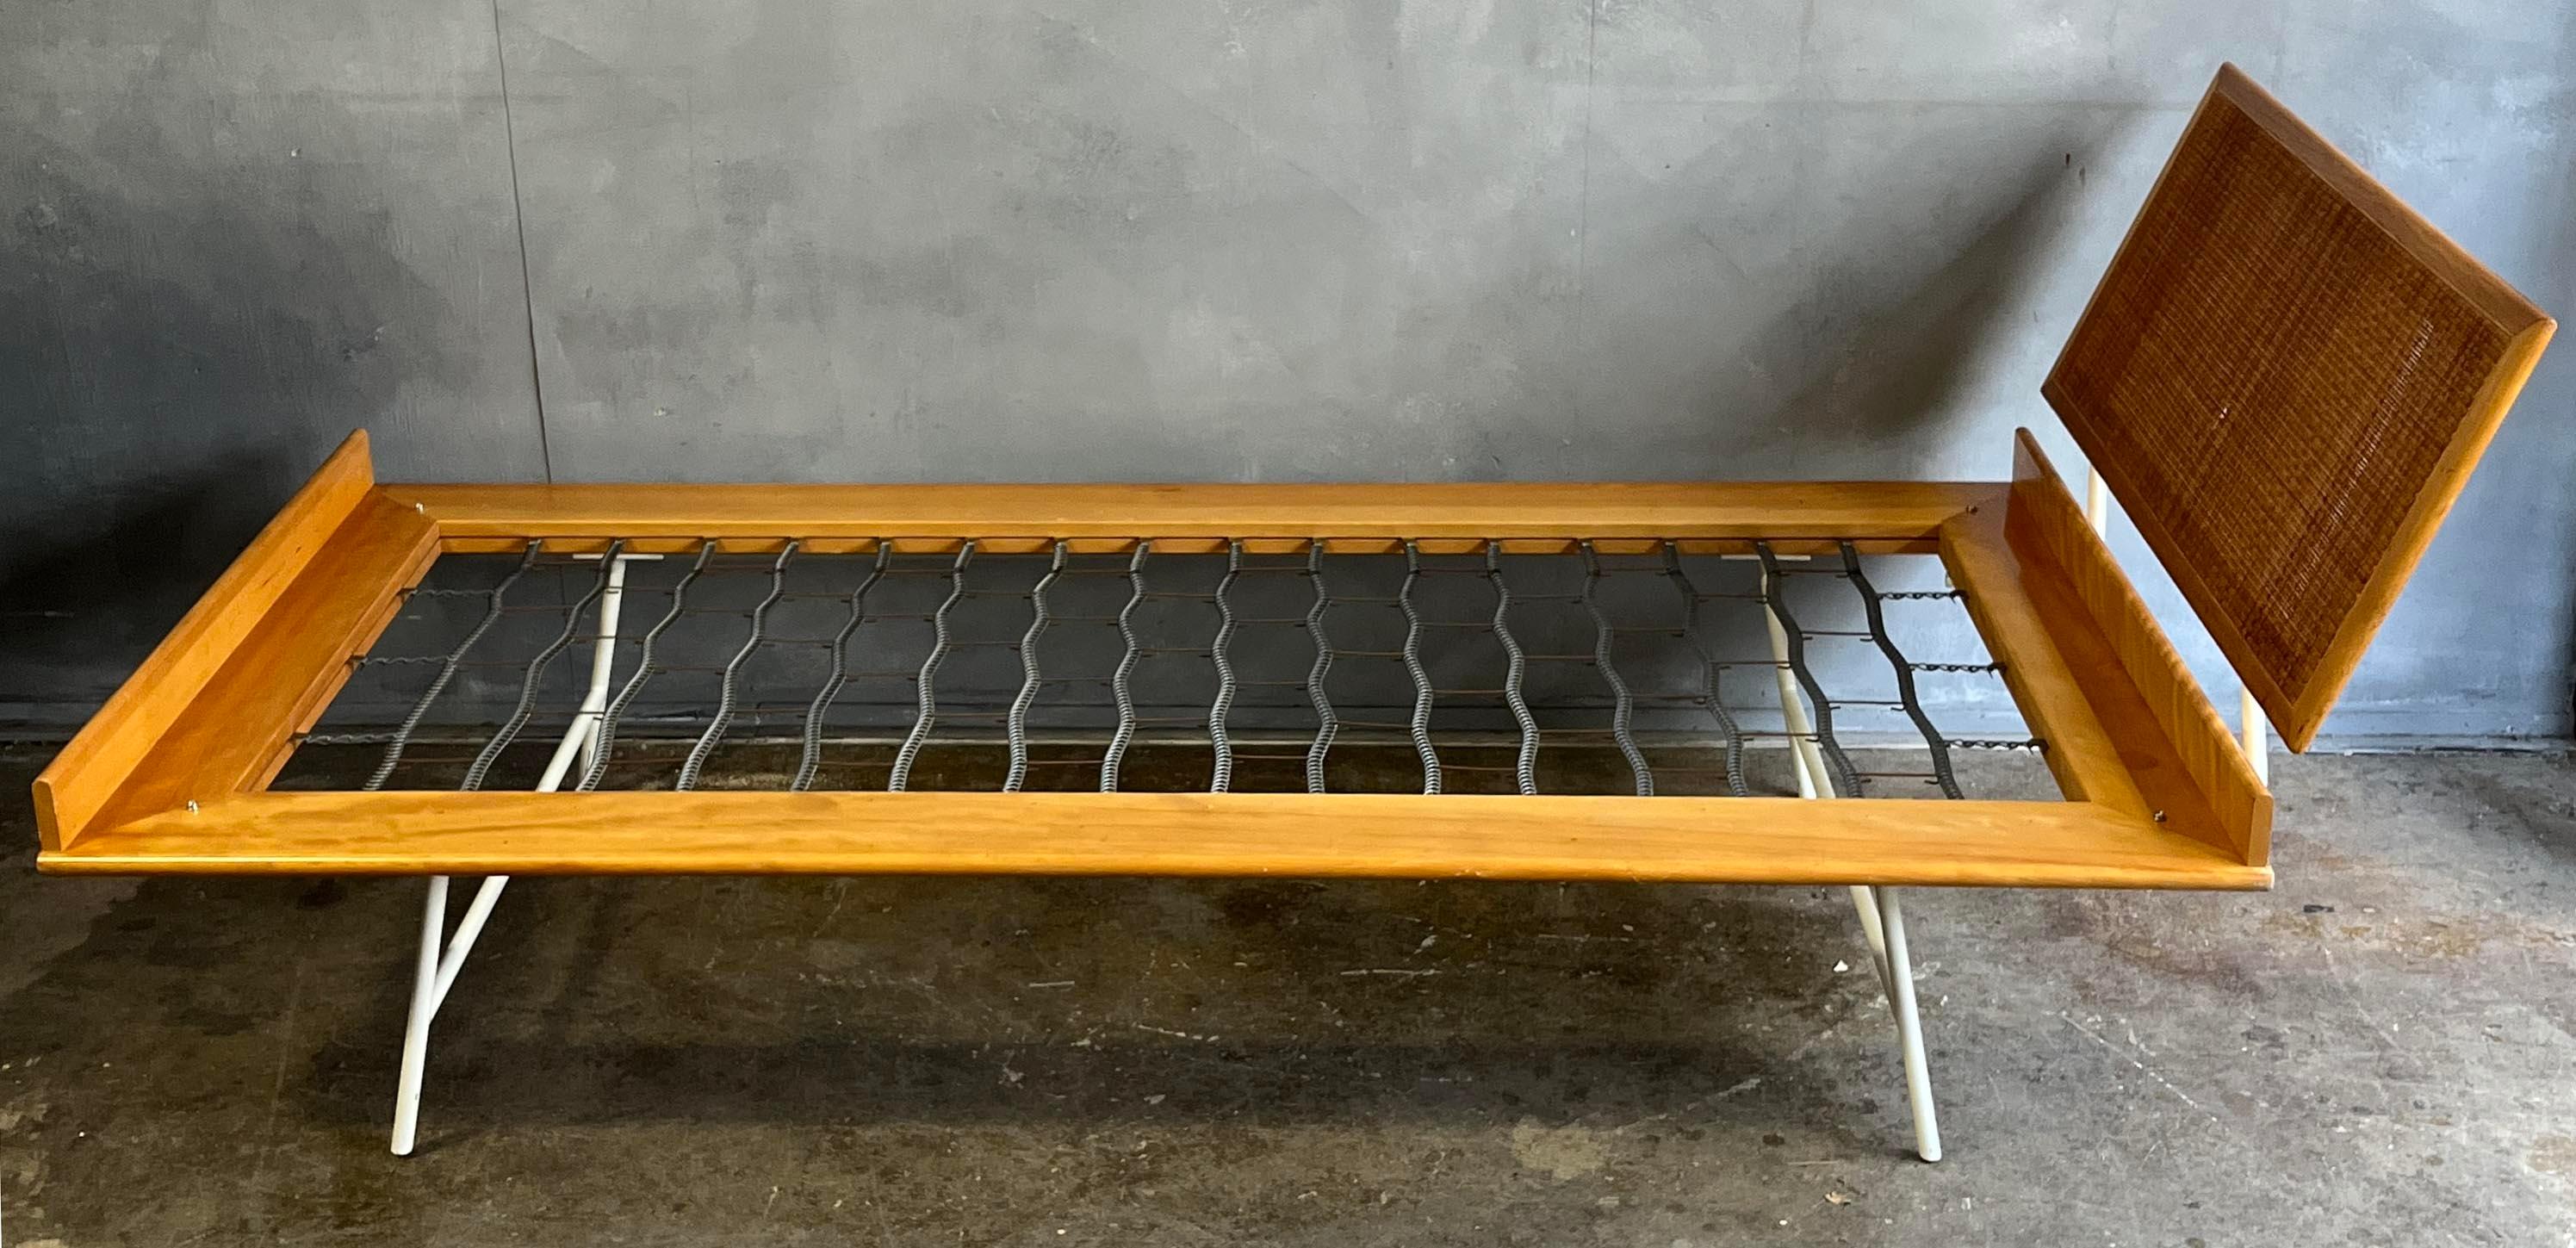 20th Century Midcentury Thin Edge Bed by George Nelson for Herman Miller 1950's